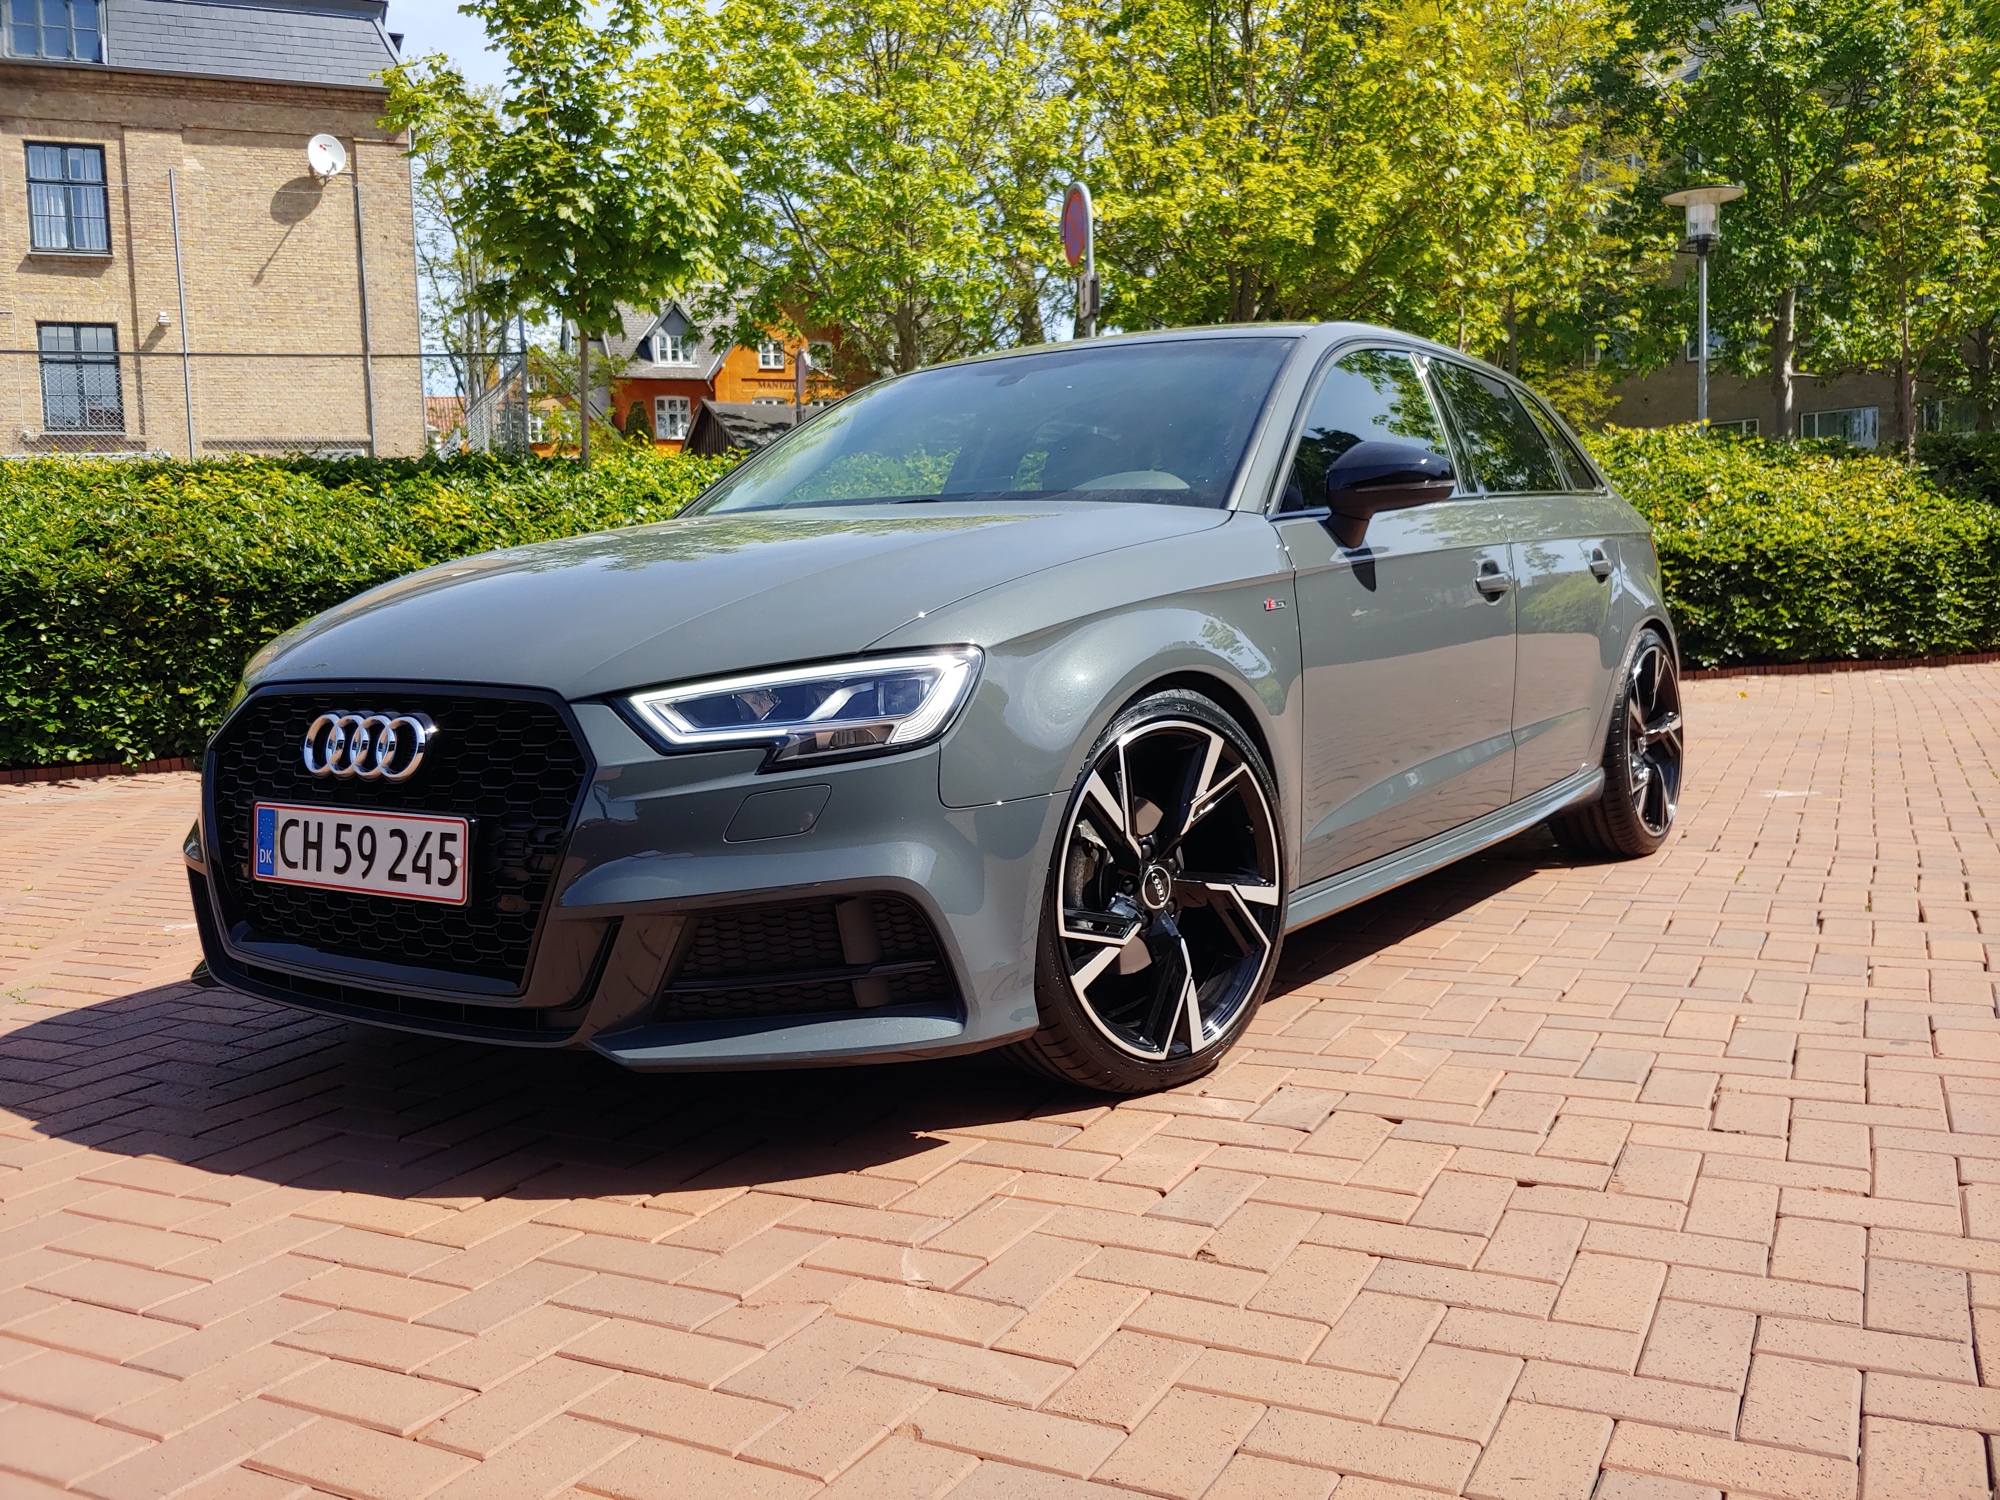 With RS6 style wheels 2